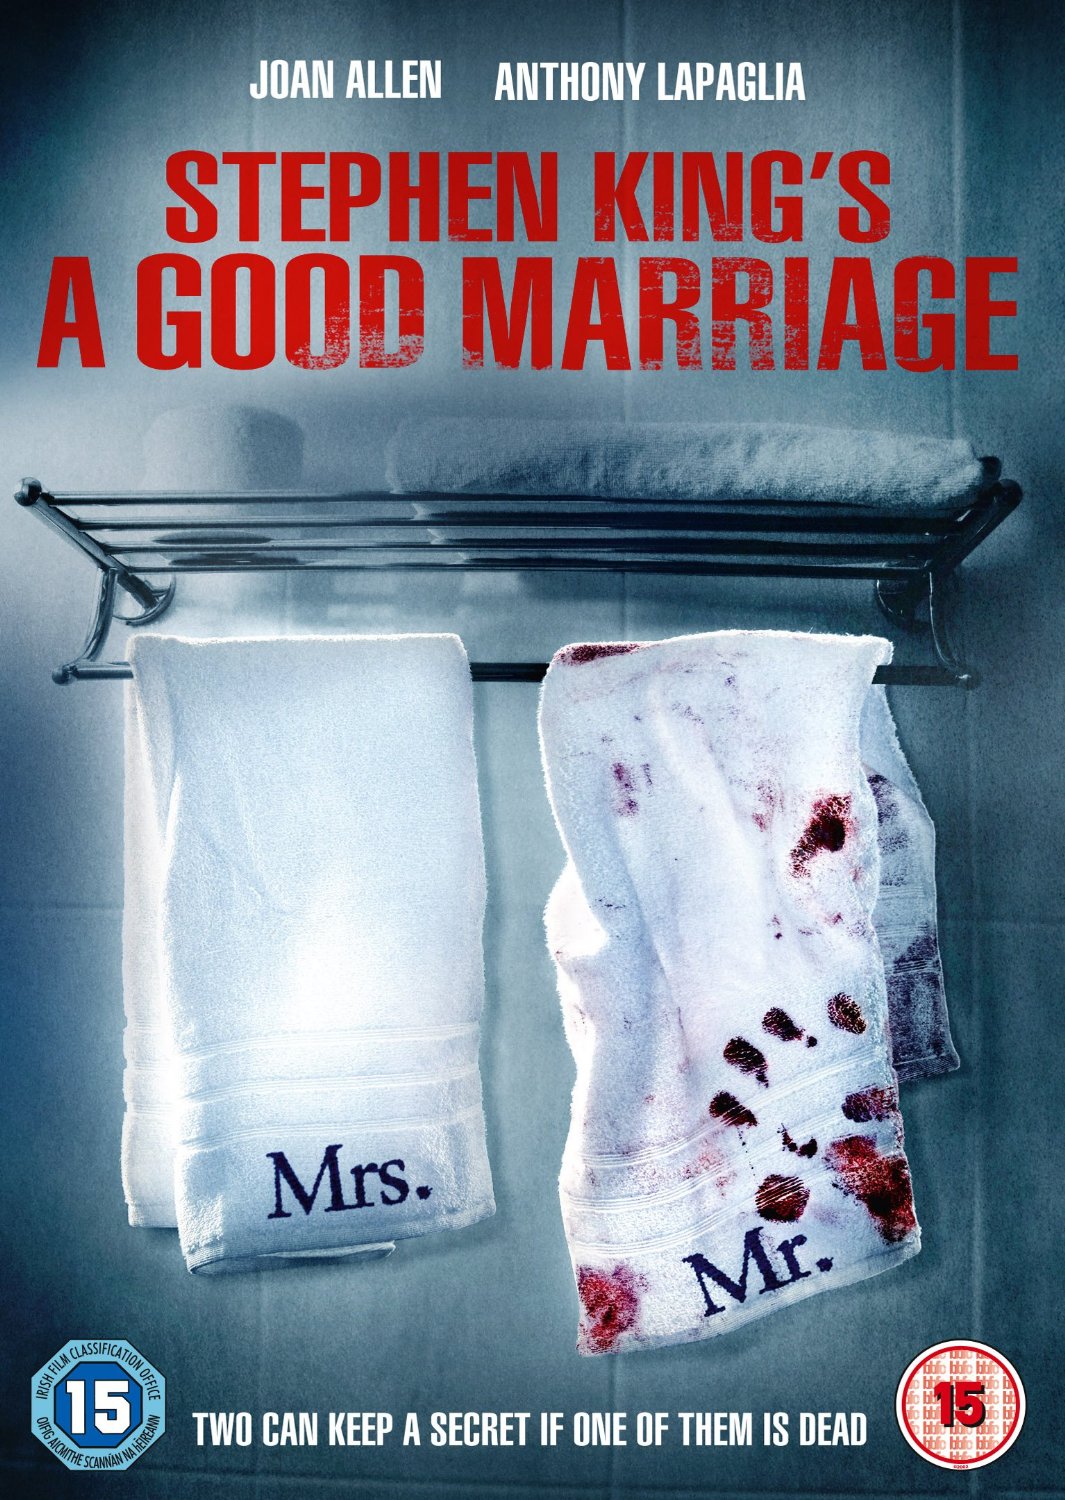 A Good Marriage (DVD)